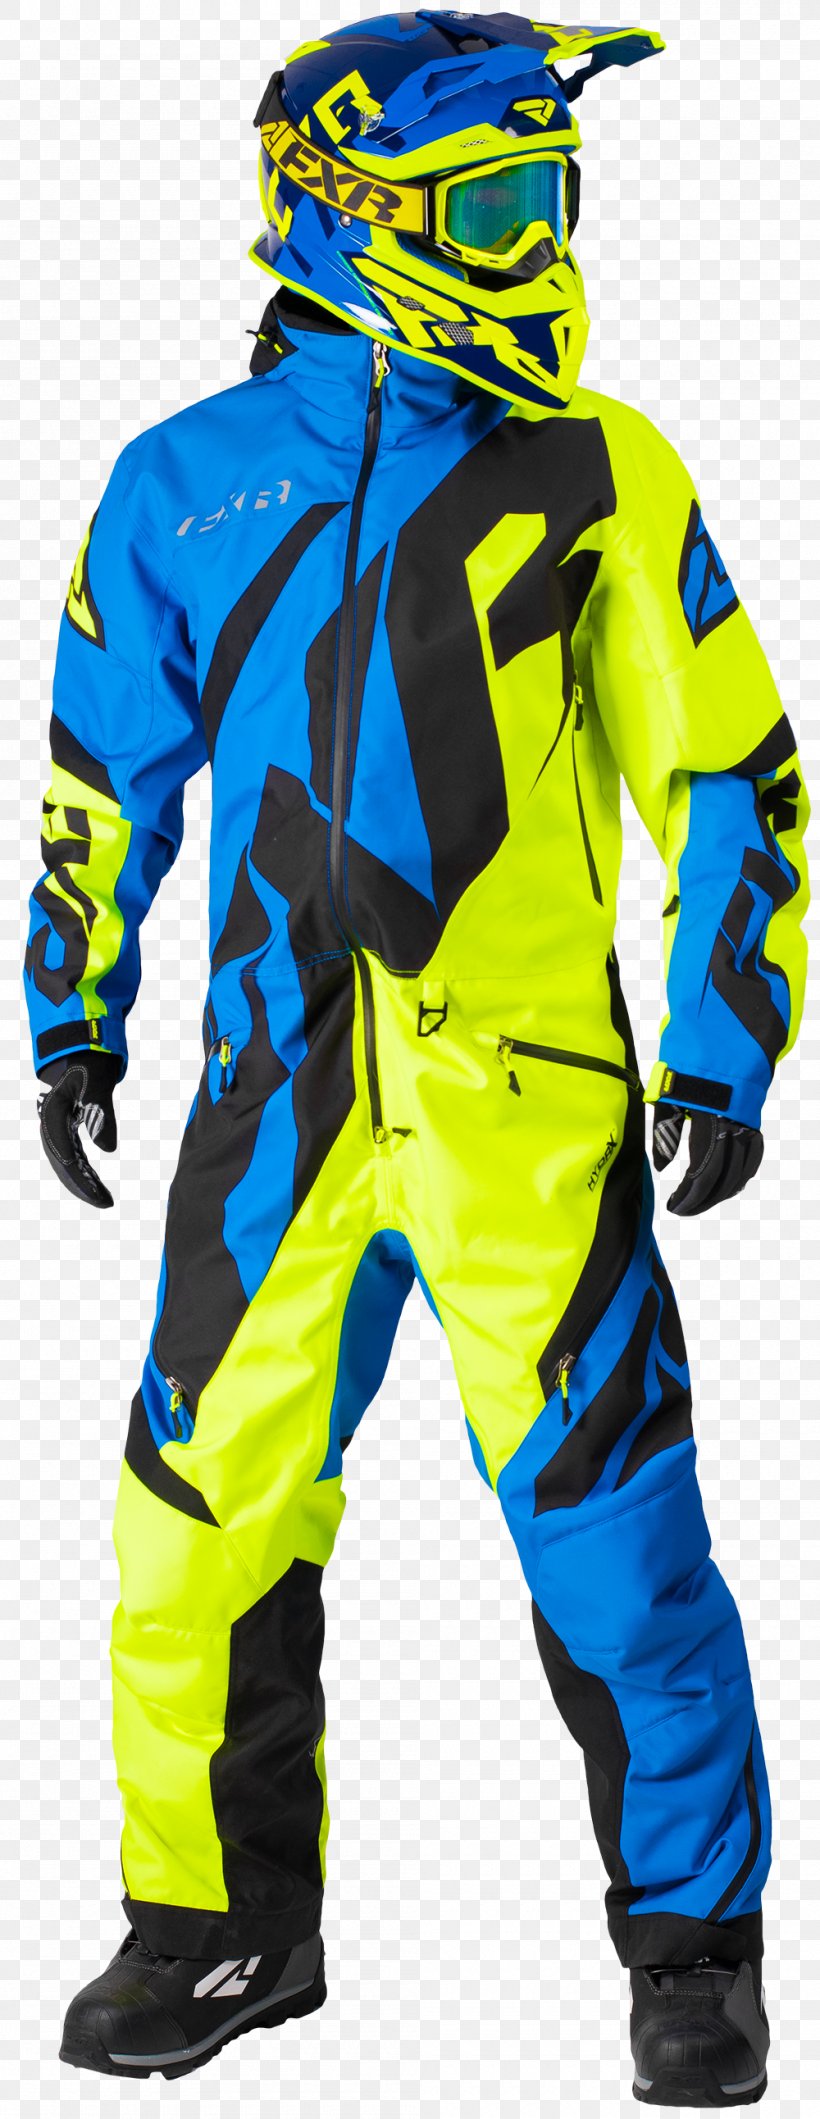 Snowmobile Suit Clothing Snowmobile Suit Long Underwear, PNG, 1000x2585px, Snowmobile, Blue, Boilersuit, Clothing, Clothing Accessories Download Free